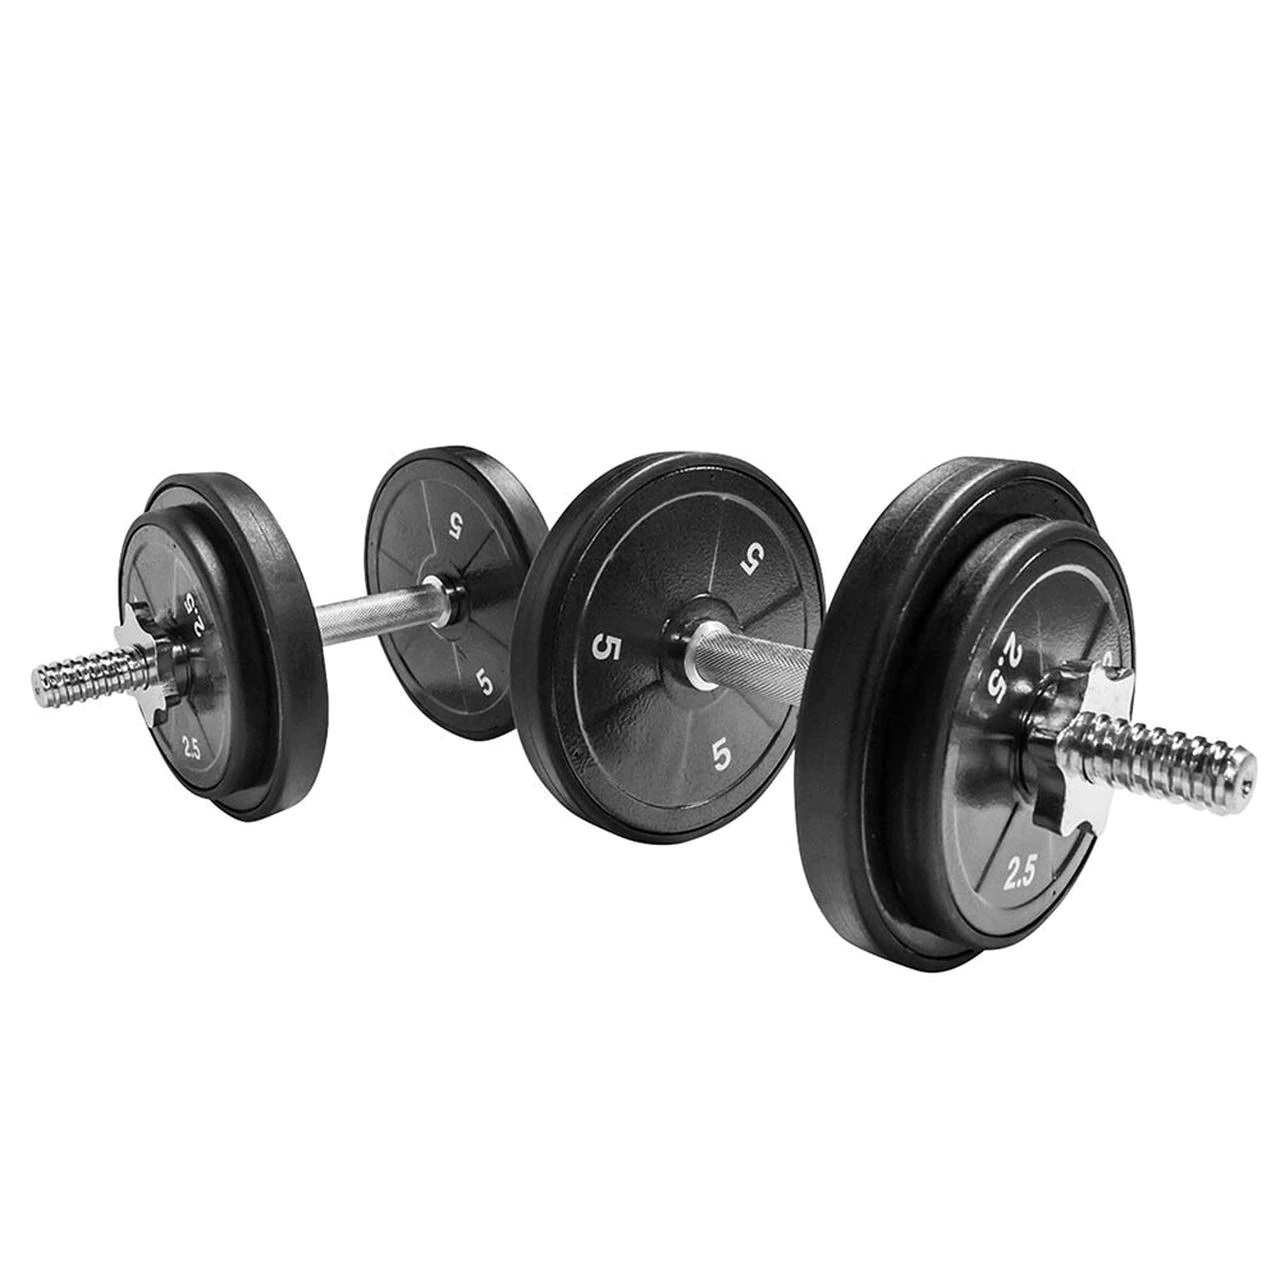 Marcy 14” Adjustable Chrome Threaded Dumbbell Handles for Standard Weight Plates 